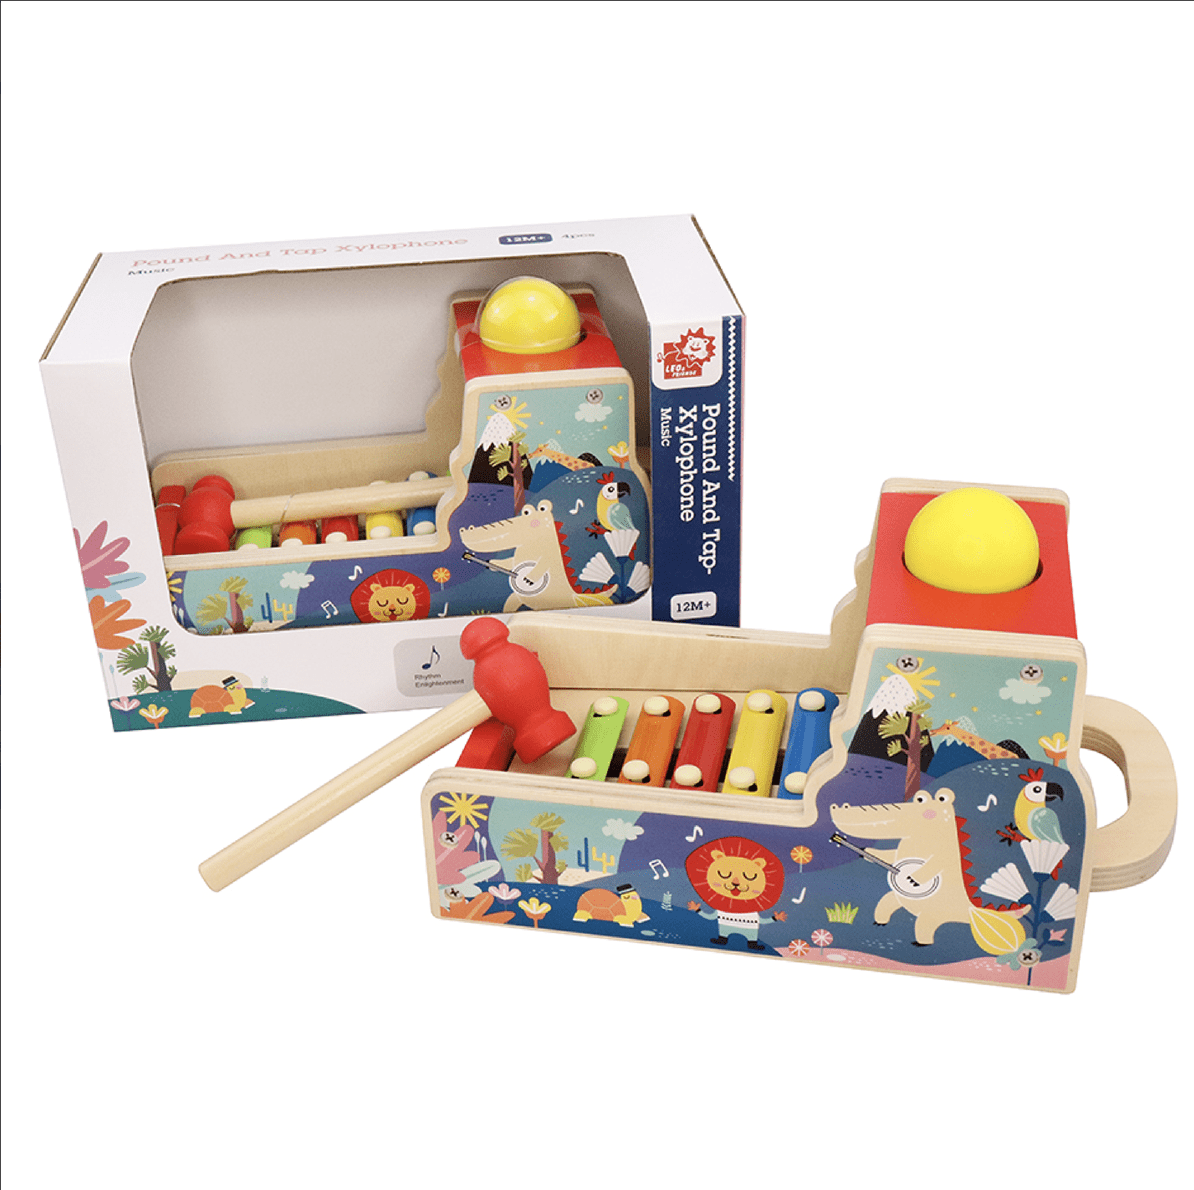 Leo and Friends Default Pound & Tap Xylophone with Slide-Out Xylophone, Hammer, and Bright Colors